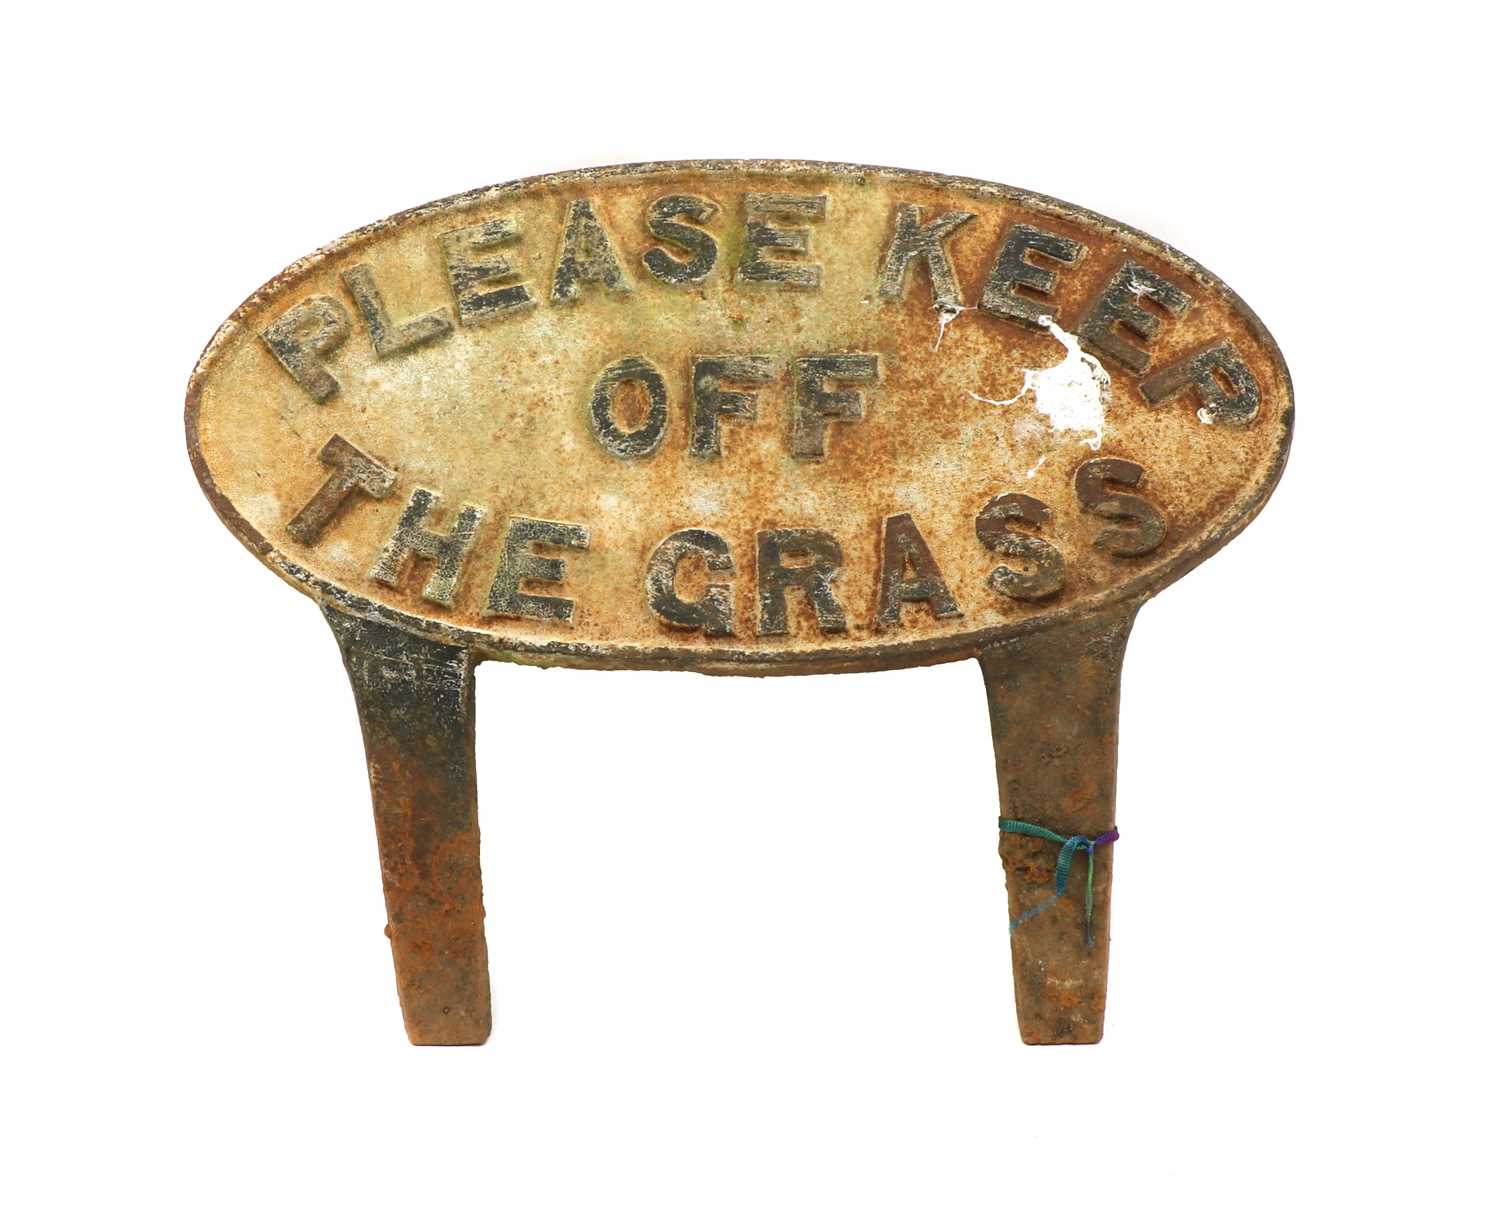 Lot 112 - A painted cast iron sign